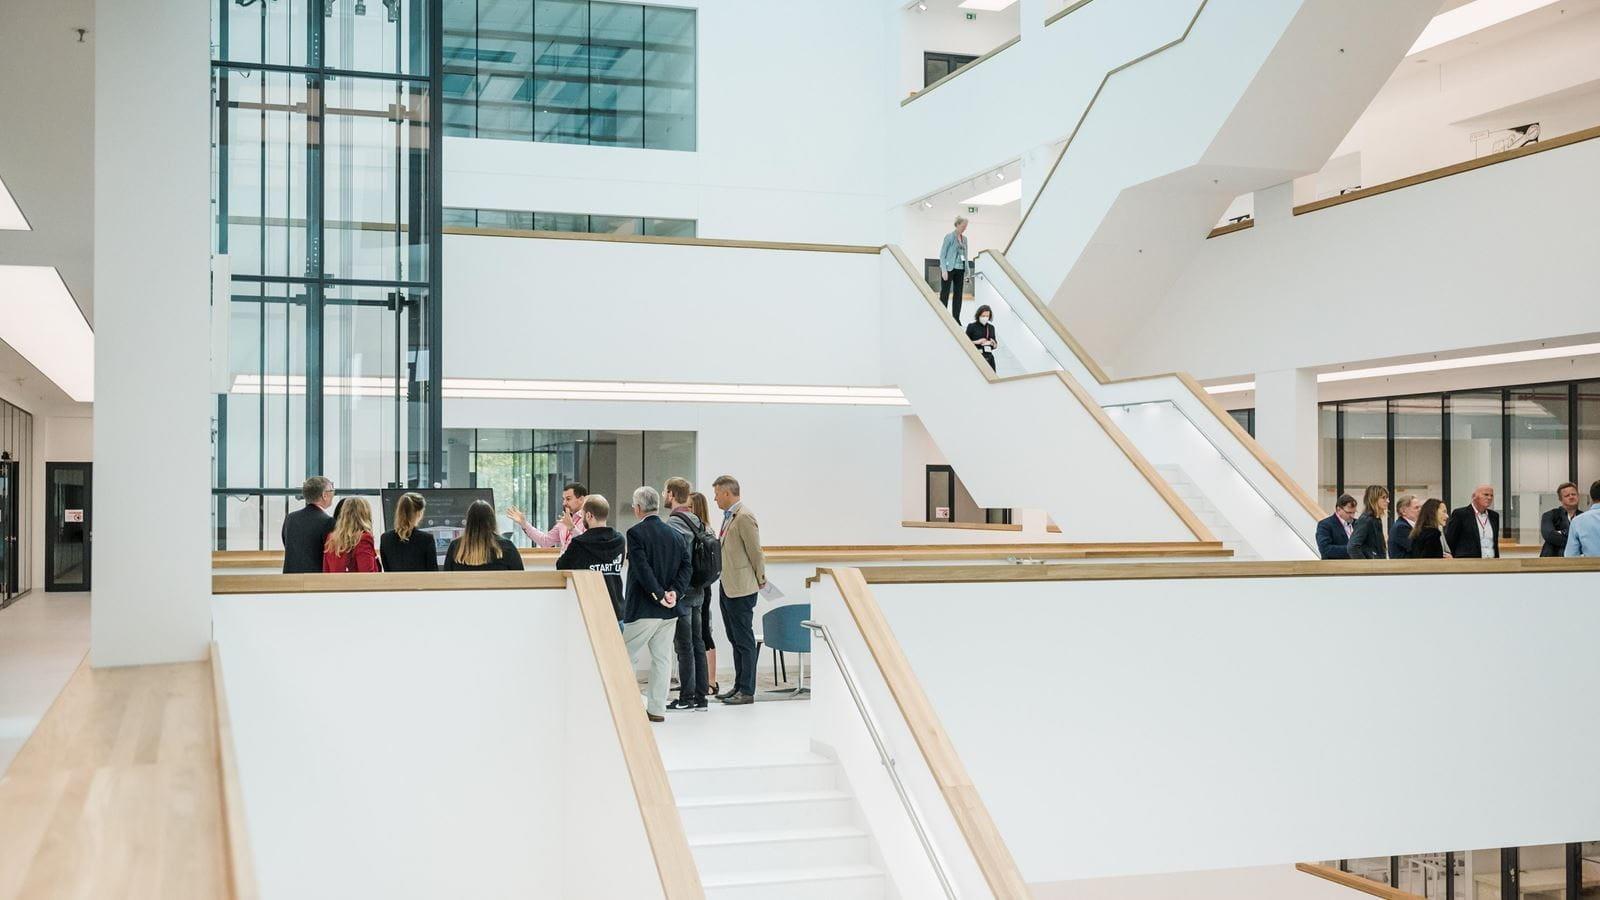 A crowd stands on the landing of the M600 R&D building staircase during the launch event.